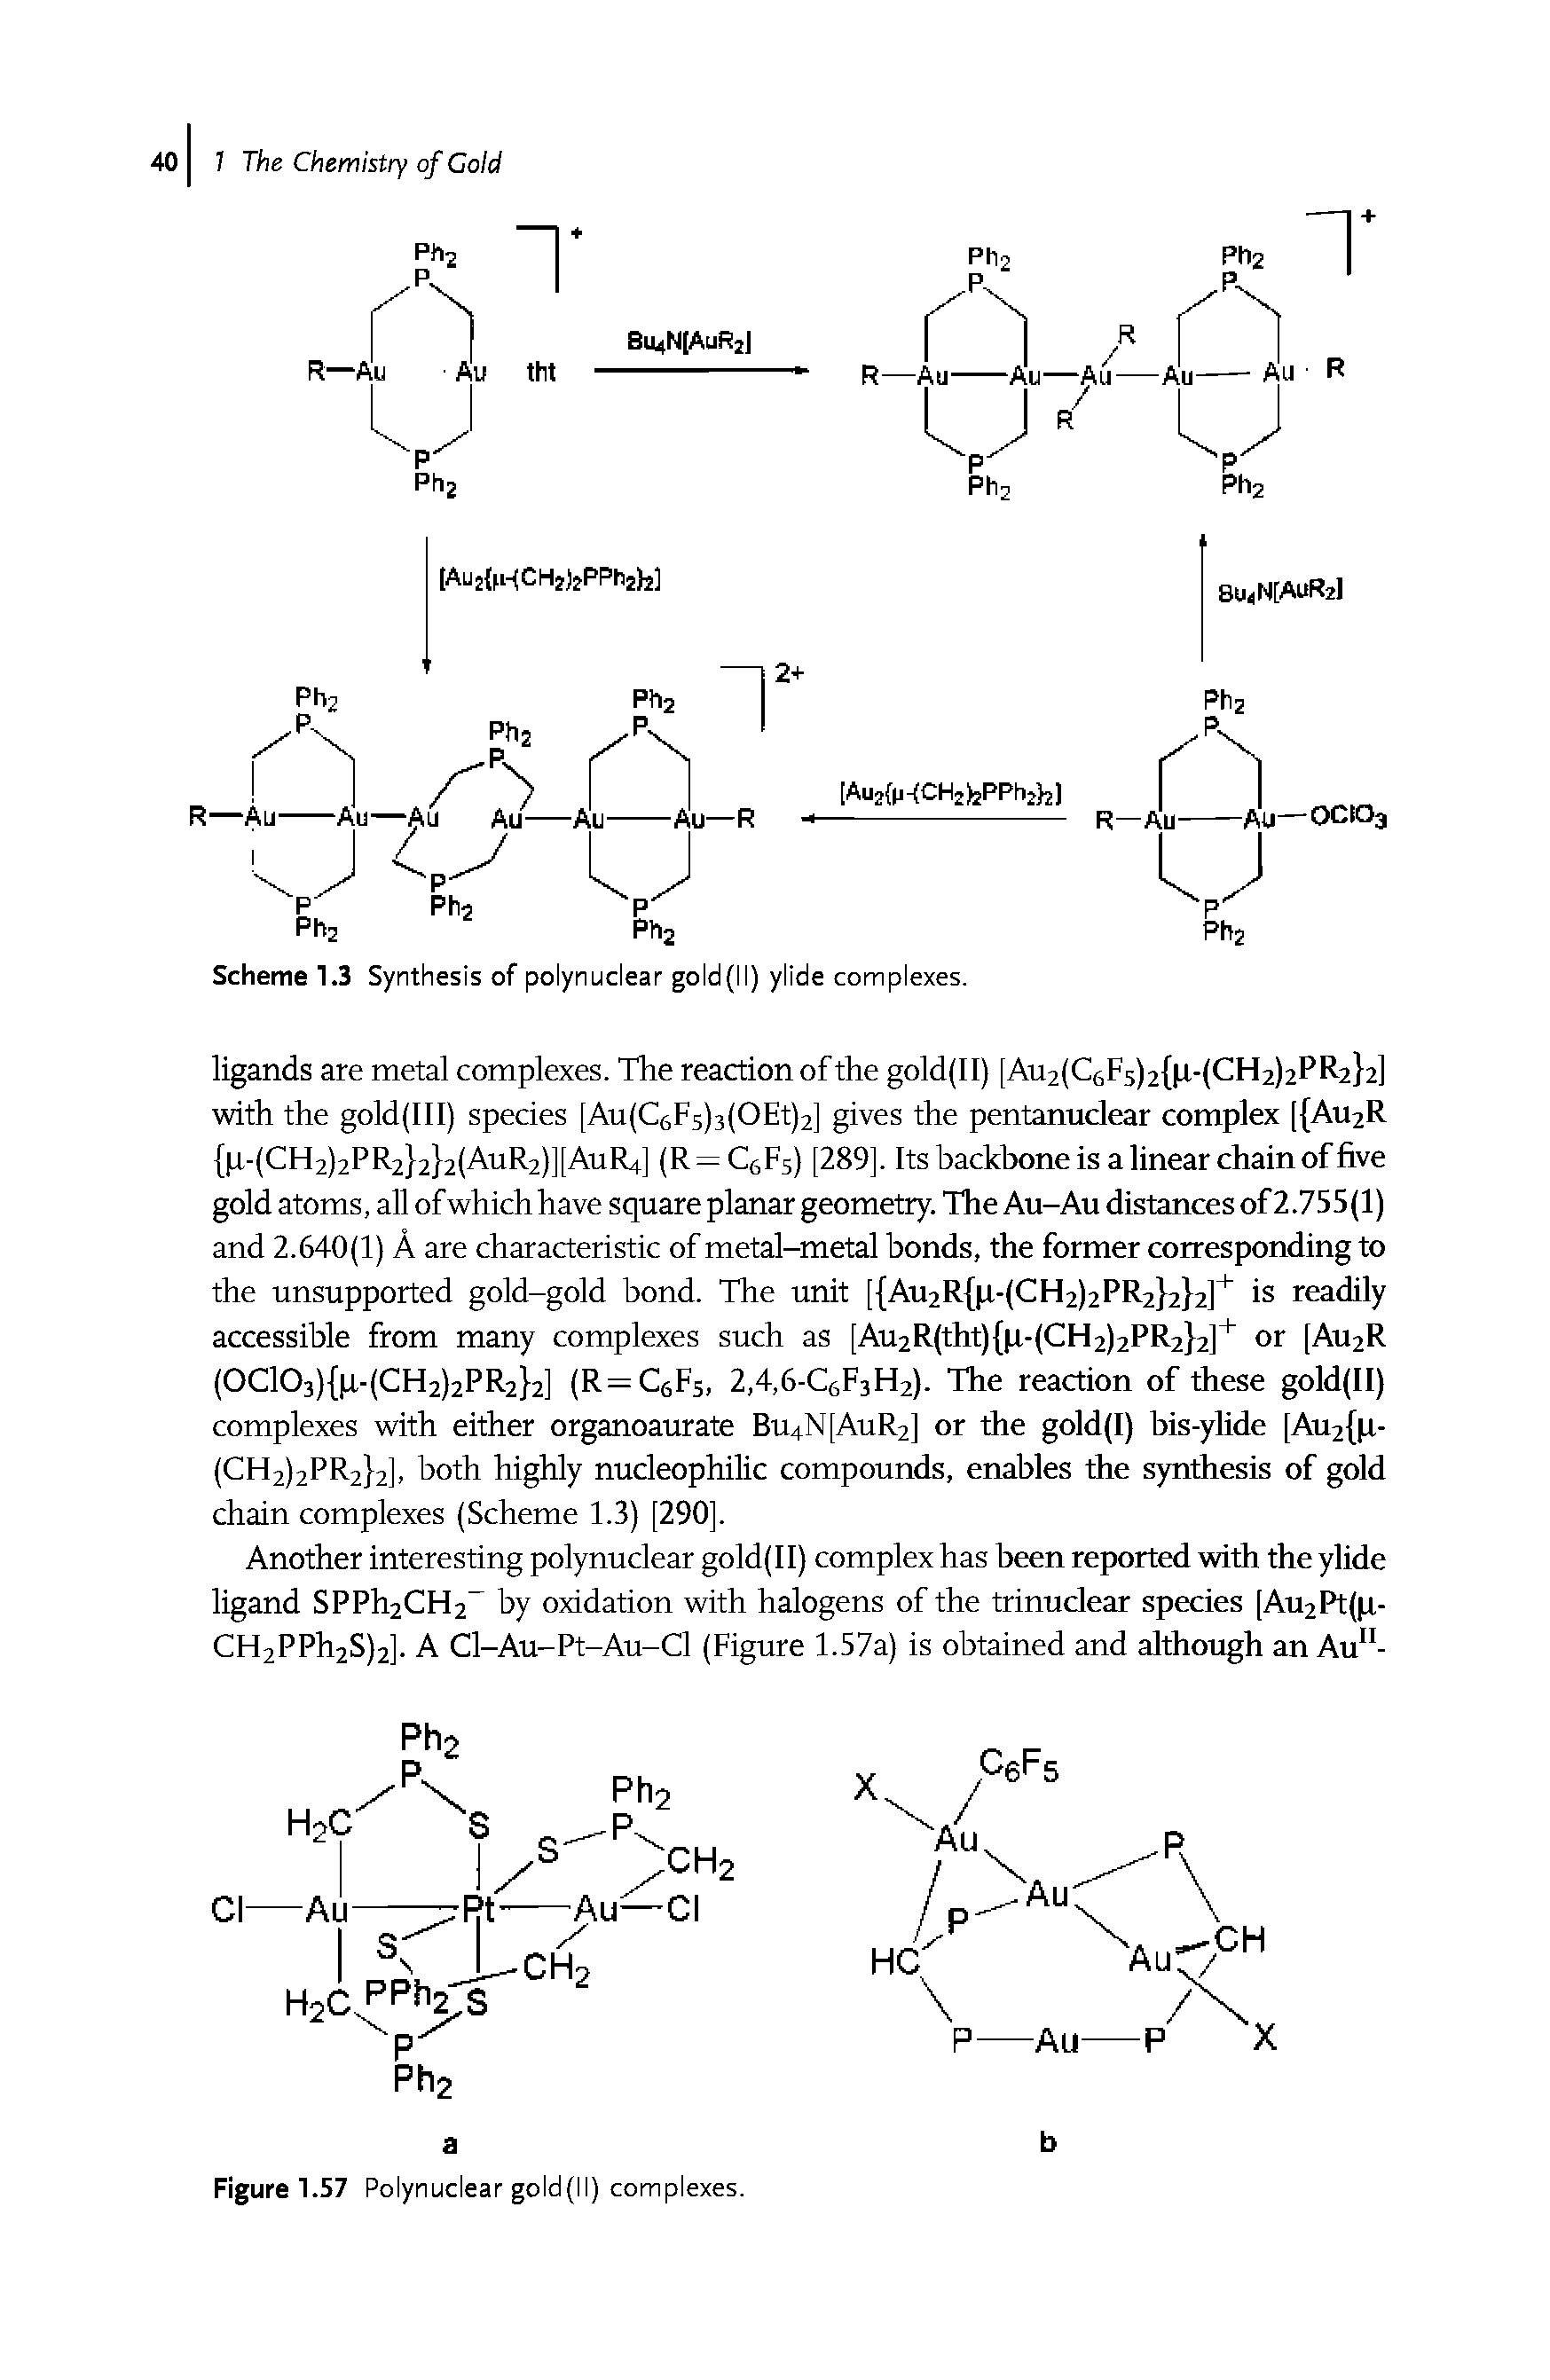 Scheme 1.3 Synthesis of polynuclear gold(II) ylide complexes.